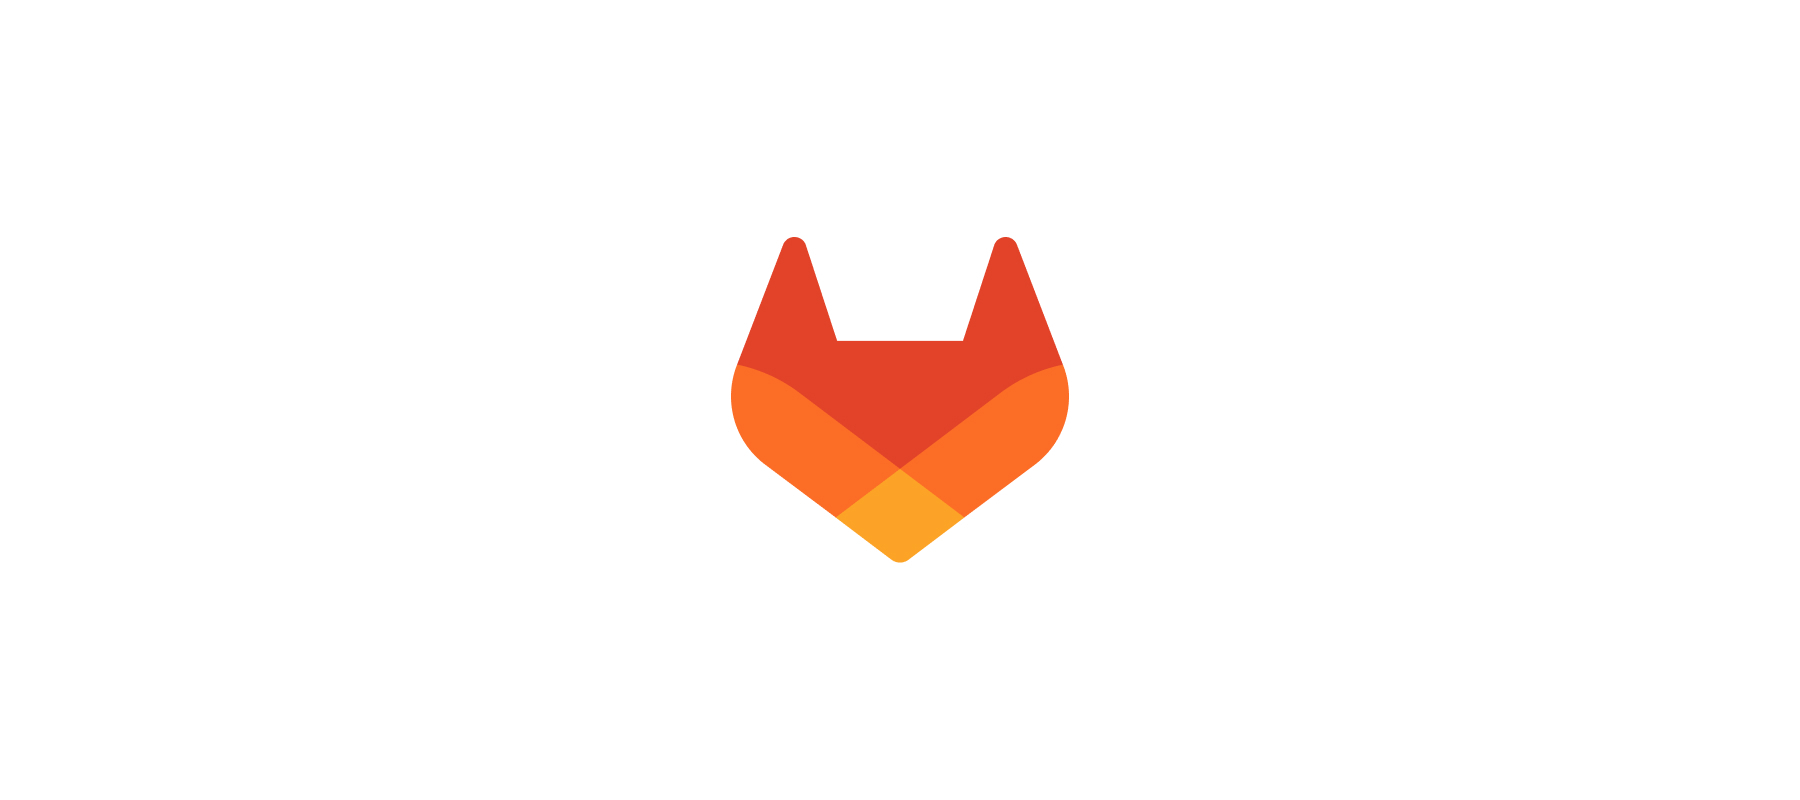 Gitlab to lay off 7% of staff